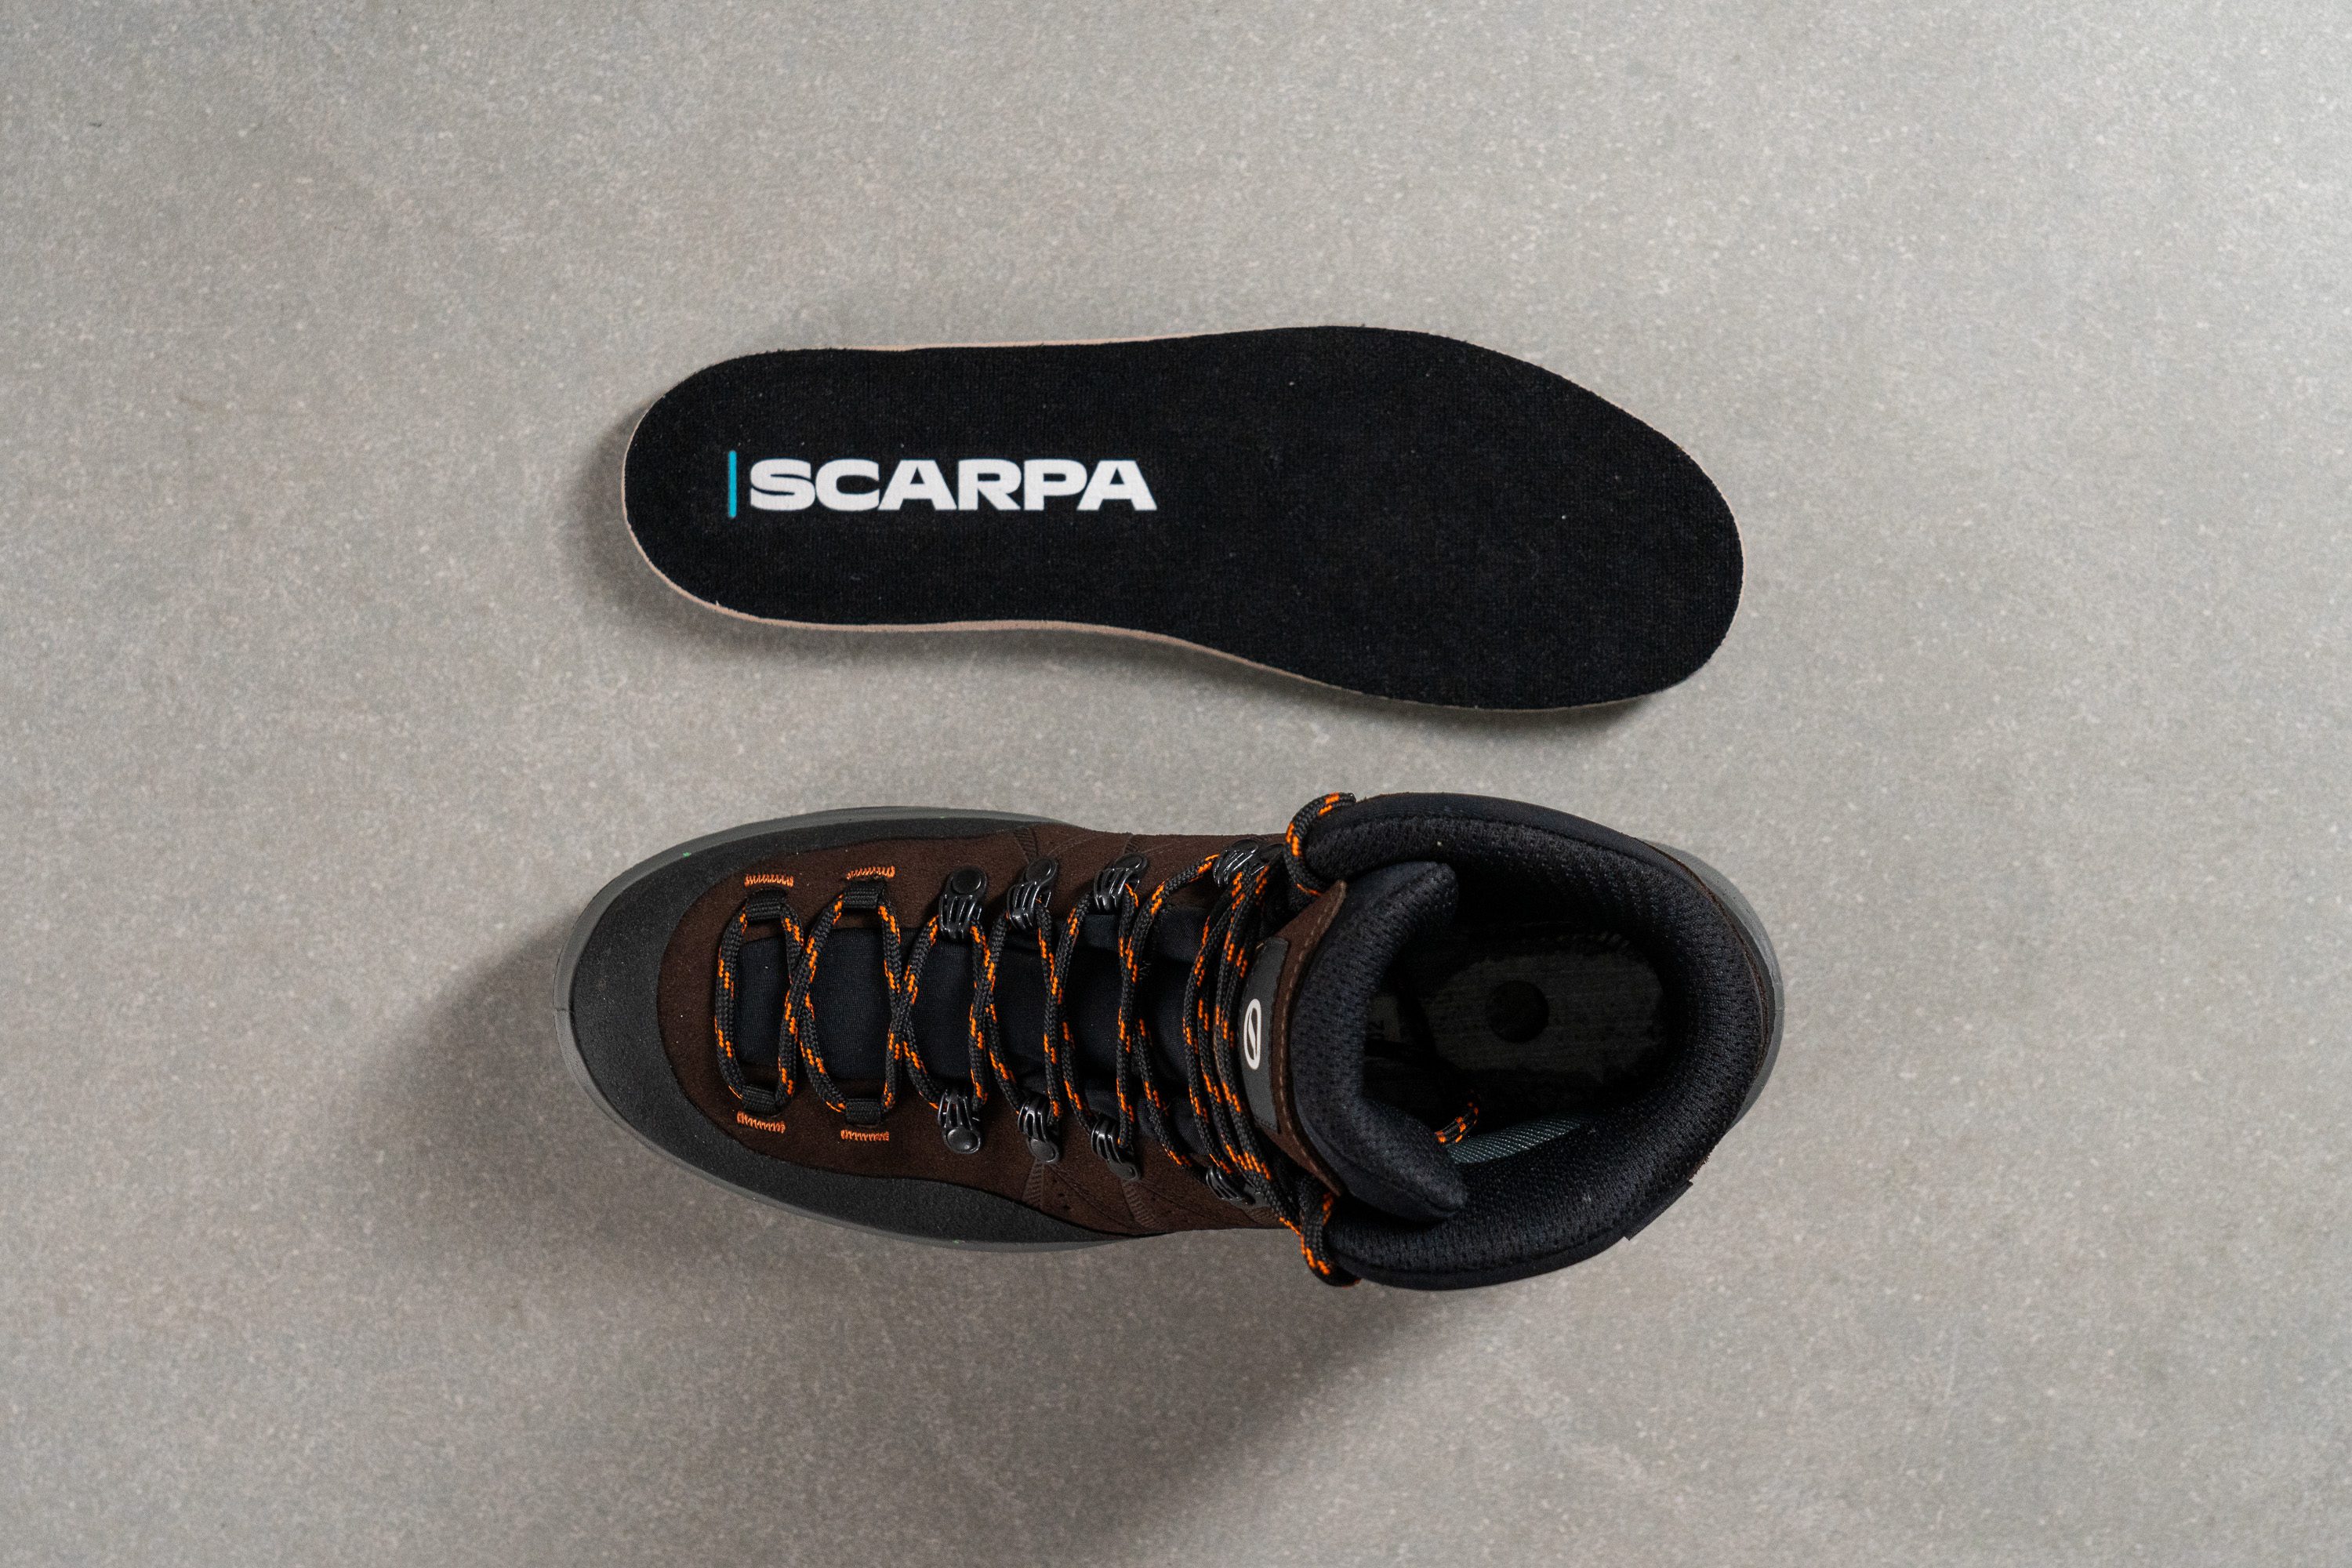 We recommend the Boreas GTX as an excellent choice for Removable insole